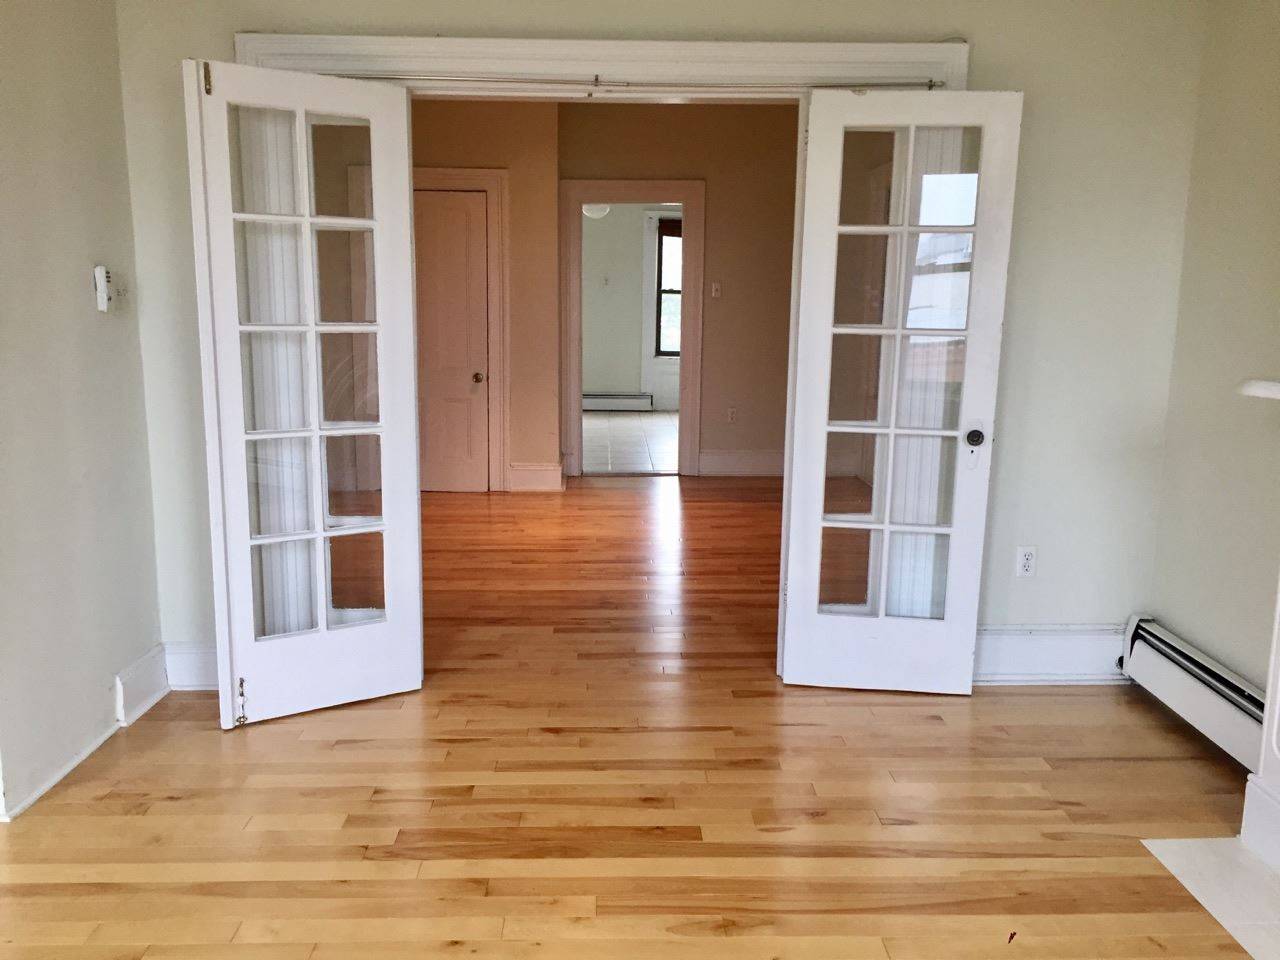 Huge 1-bedroom with lots of natural light - 1 BR New Jersey